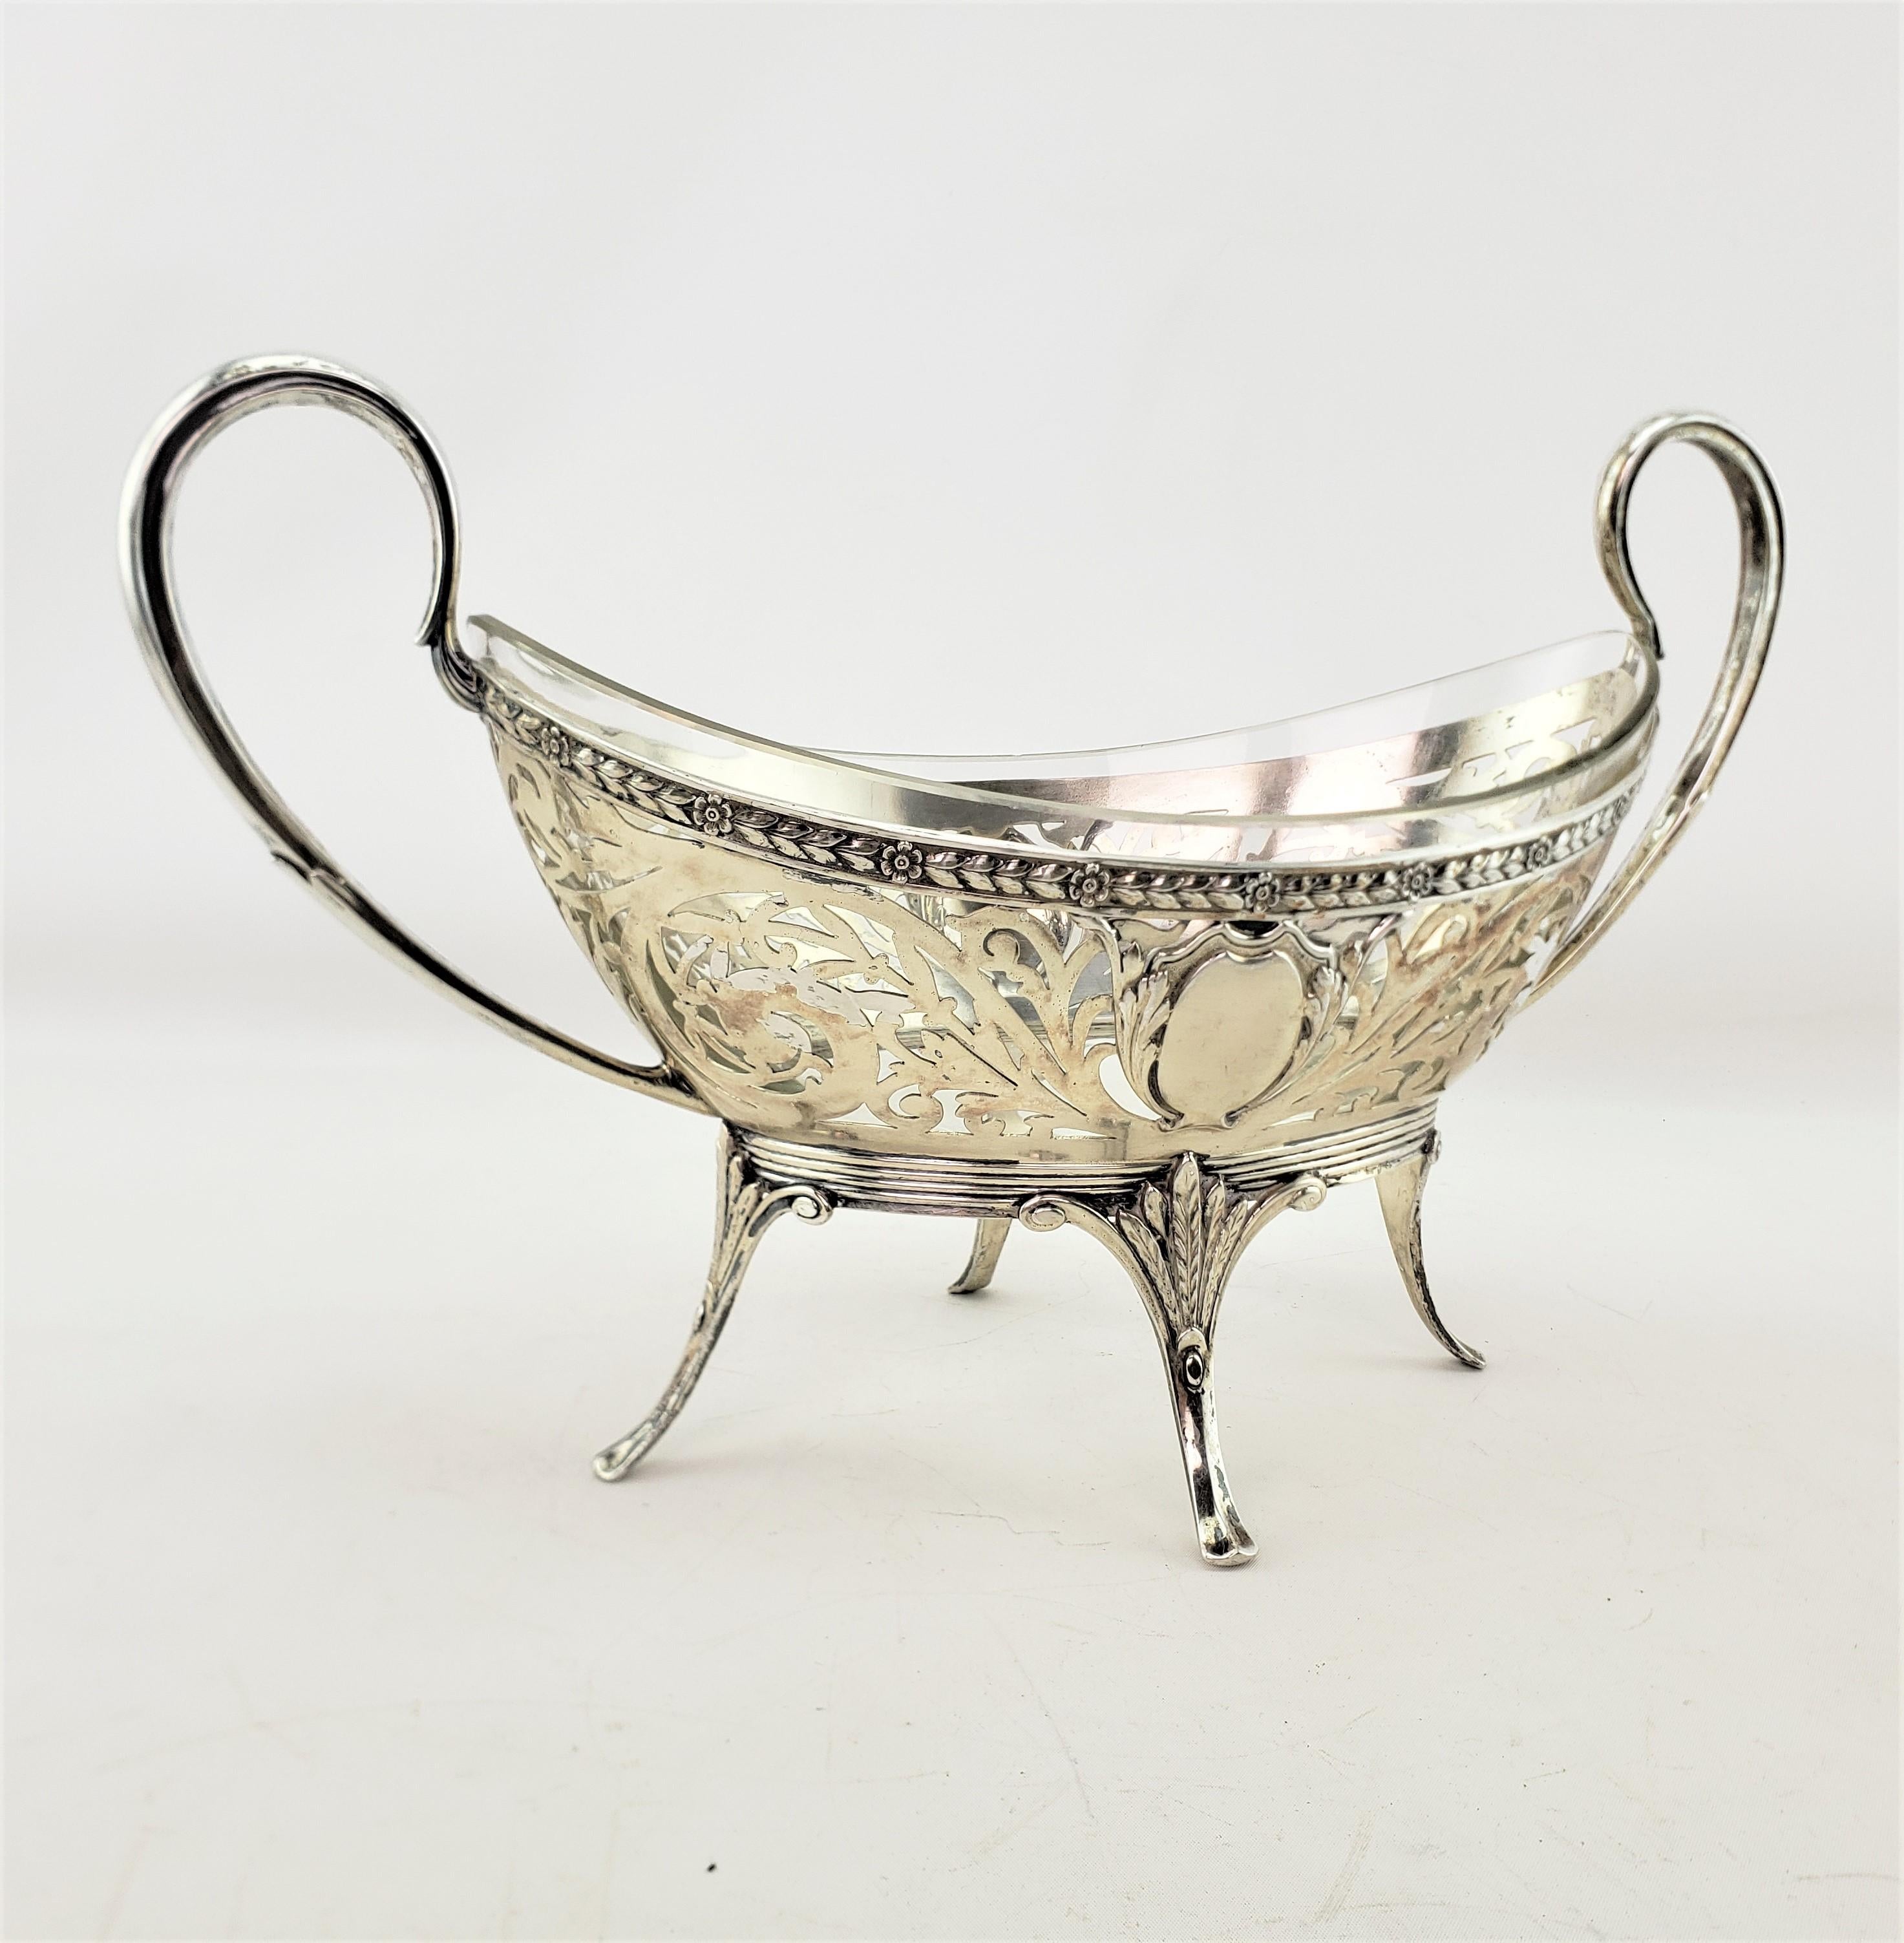 This antique centerpiece is possibly hallmarked by an unknown maker, but originated from Germany and dates to approximately 1880 and done in a period Victorian style. The basket is composed of Condinental or .800 silver and has large curled handles,